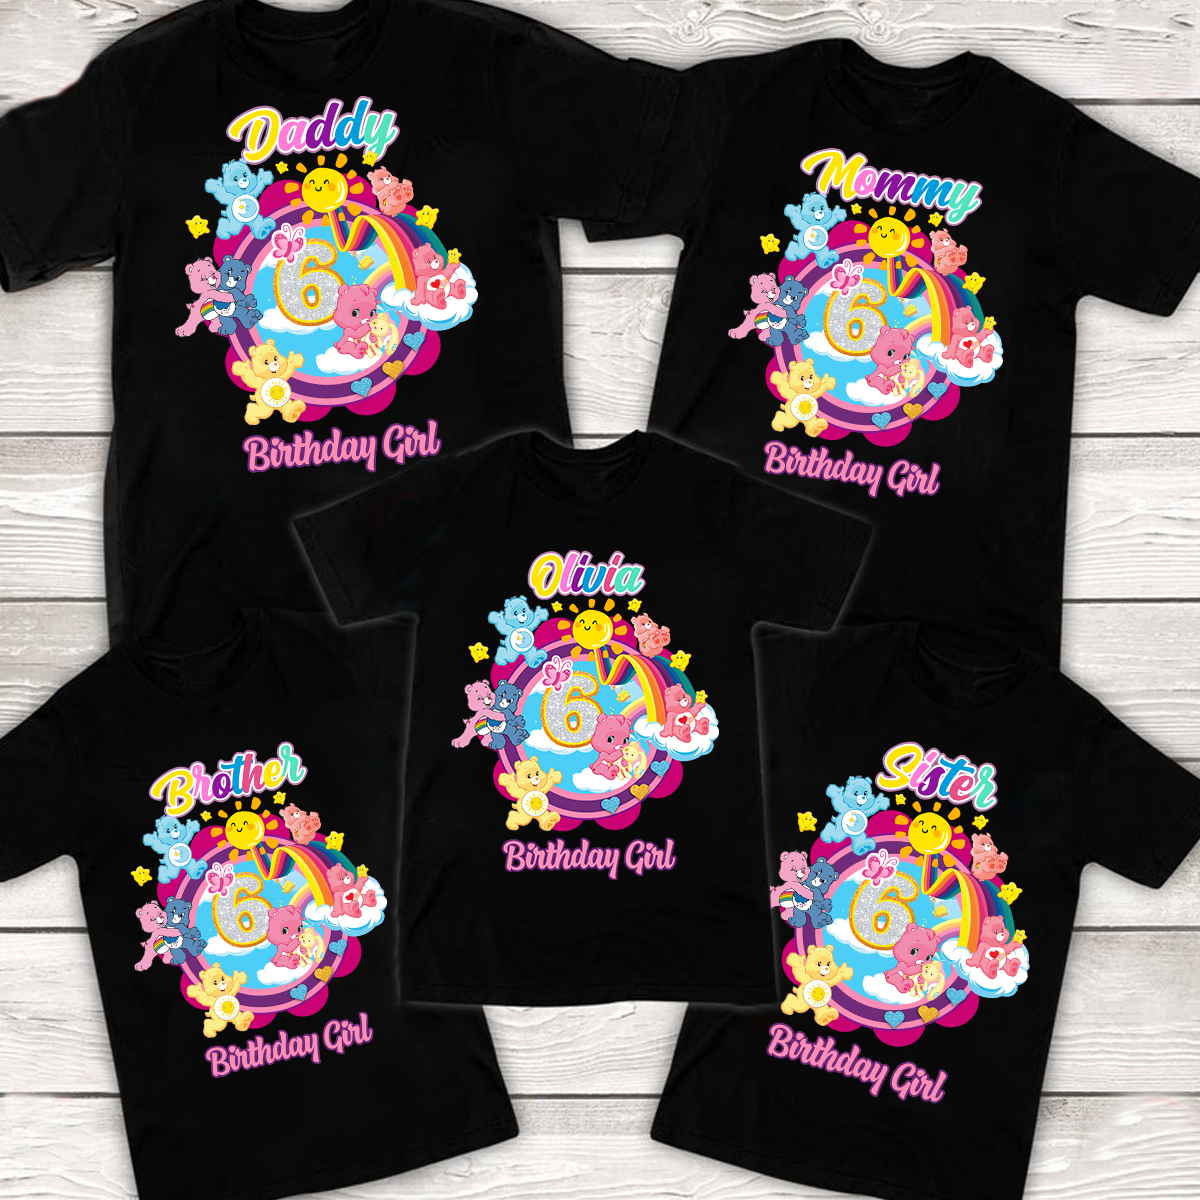 Personalized Care Bears Birthday Girl Shirt, Care Bears Tee, Care Bears Family Matching Shirt, Bears Party Shirt for Care Groups, bear lover